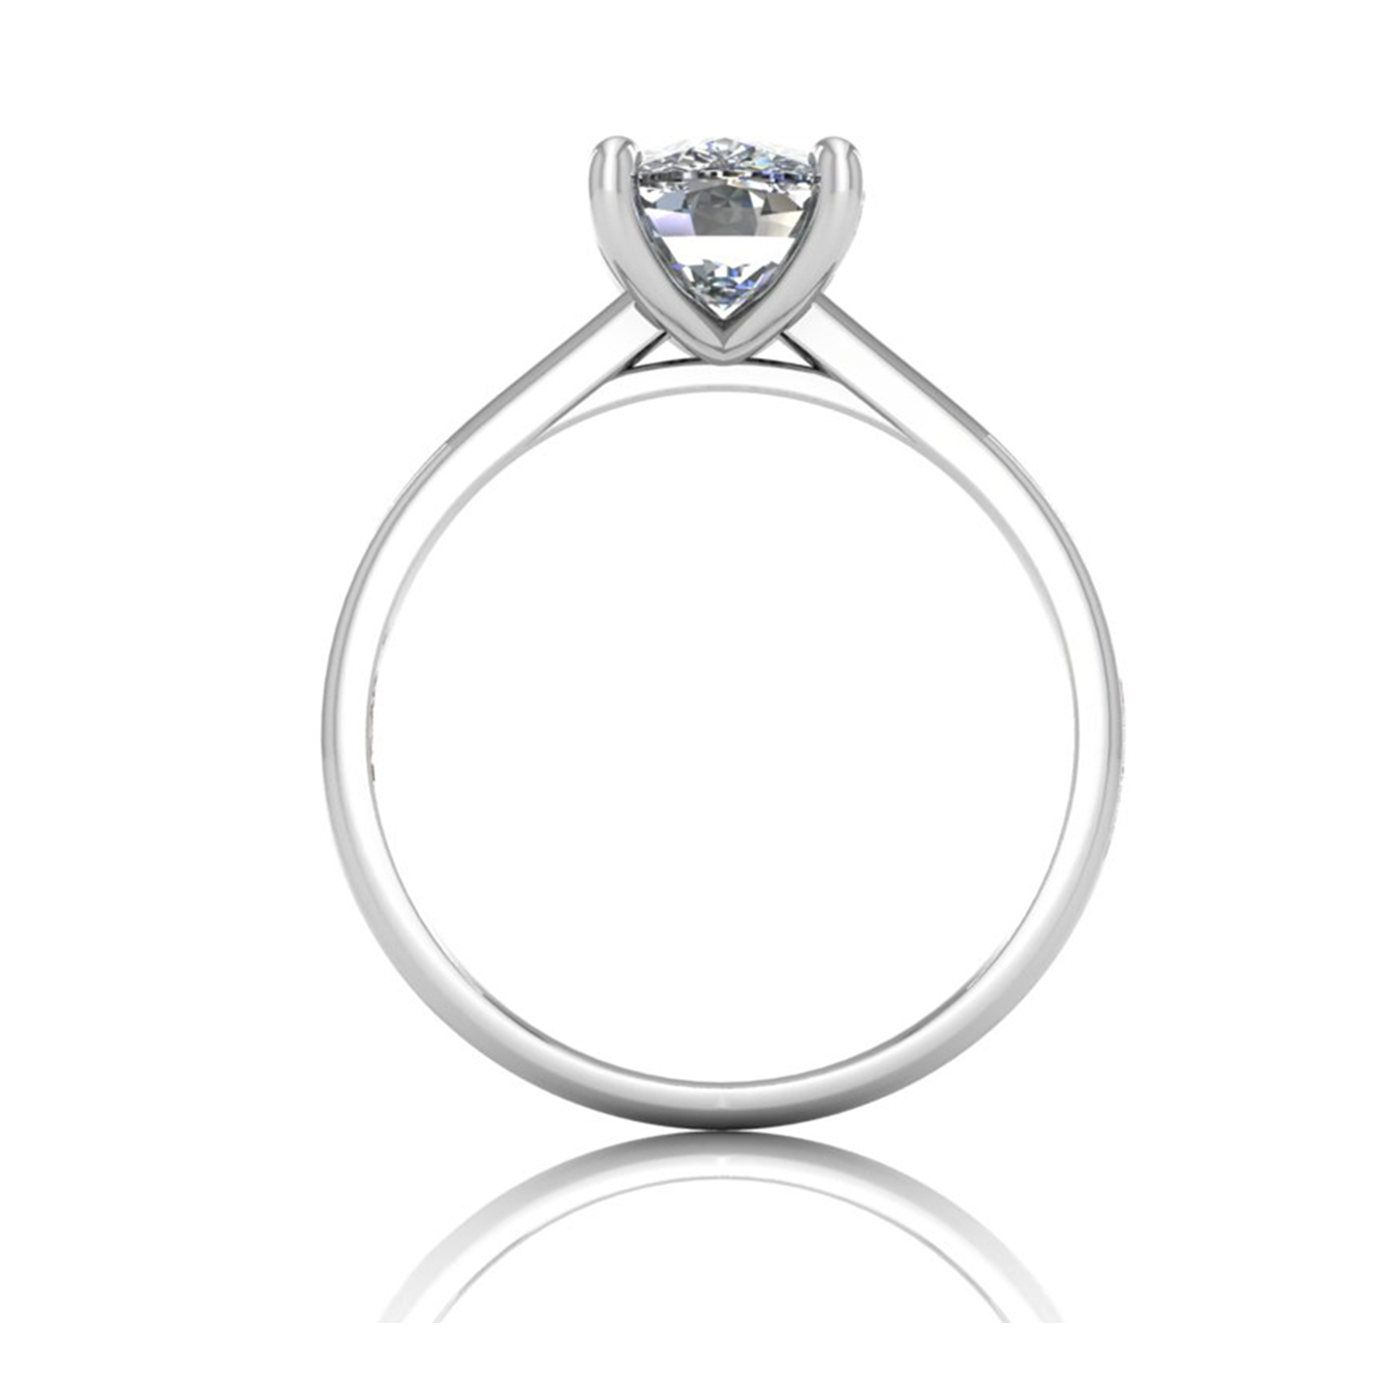 18k white gold  2.50 ct 4 prongs solitaire elongated cushion cut diamond engagement ring with whisper thin band